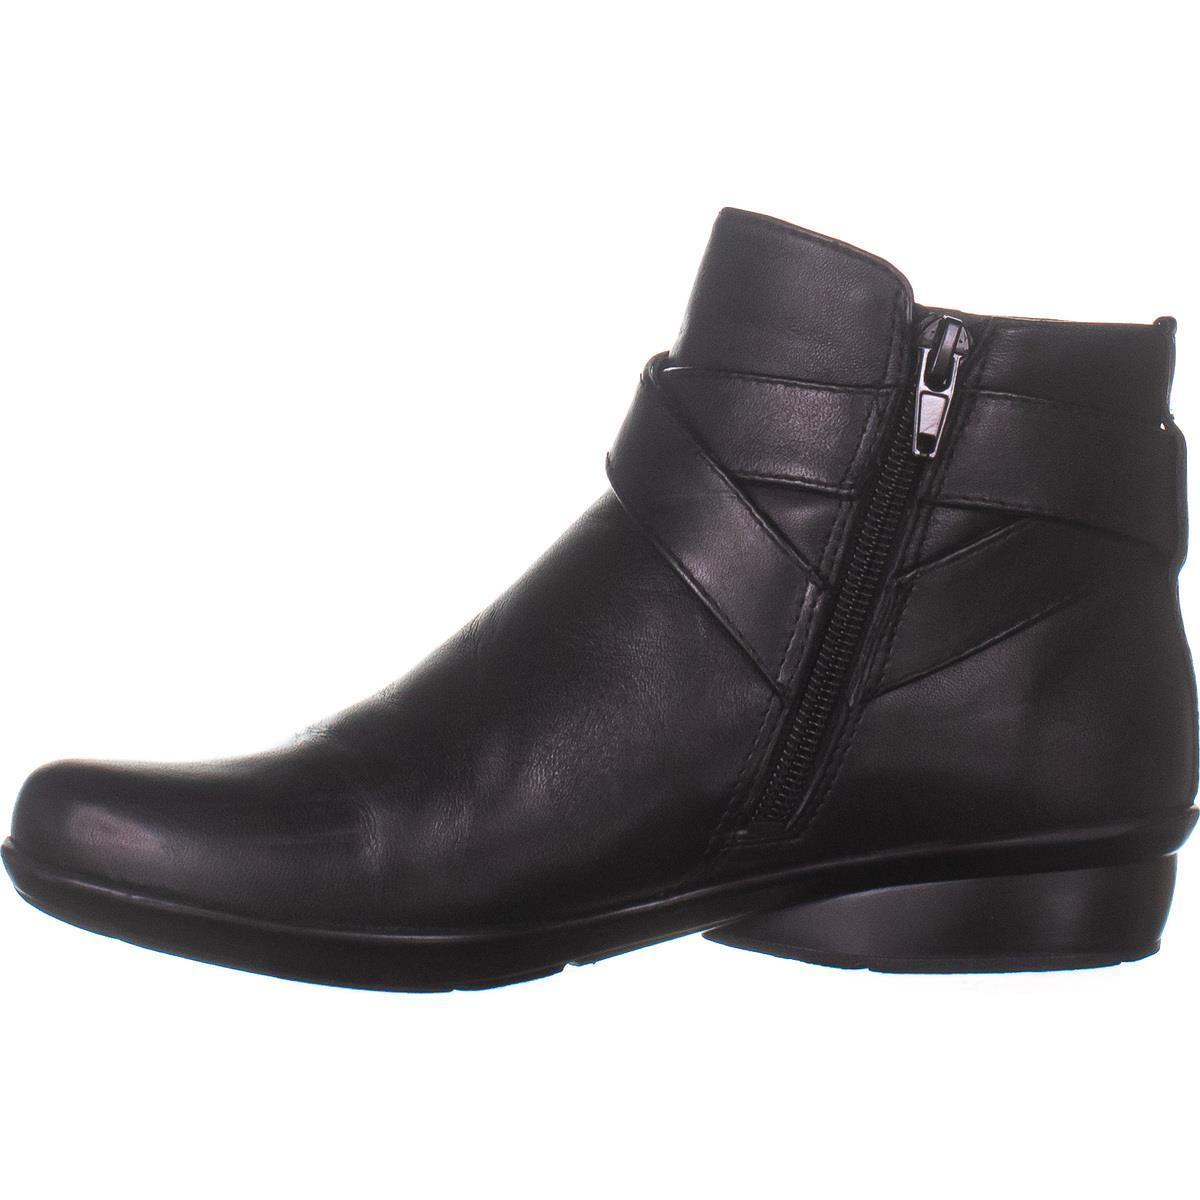 naturalizer Cassandra Ankle Boots 268, Black Leather, 5 US - Occupational